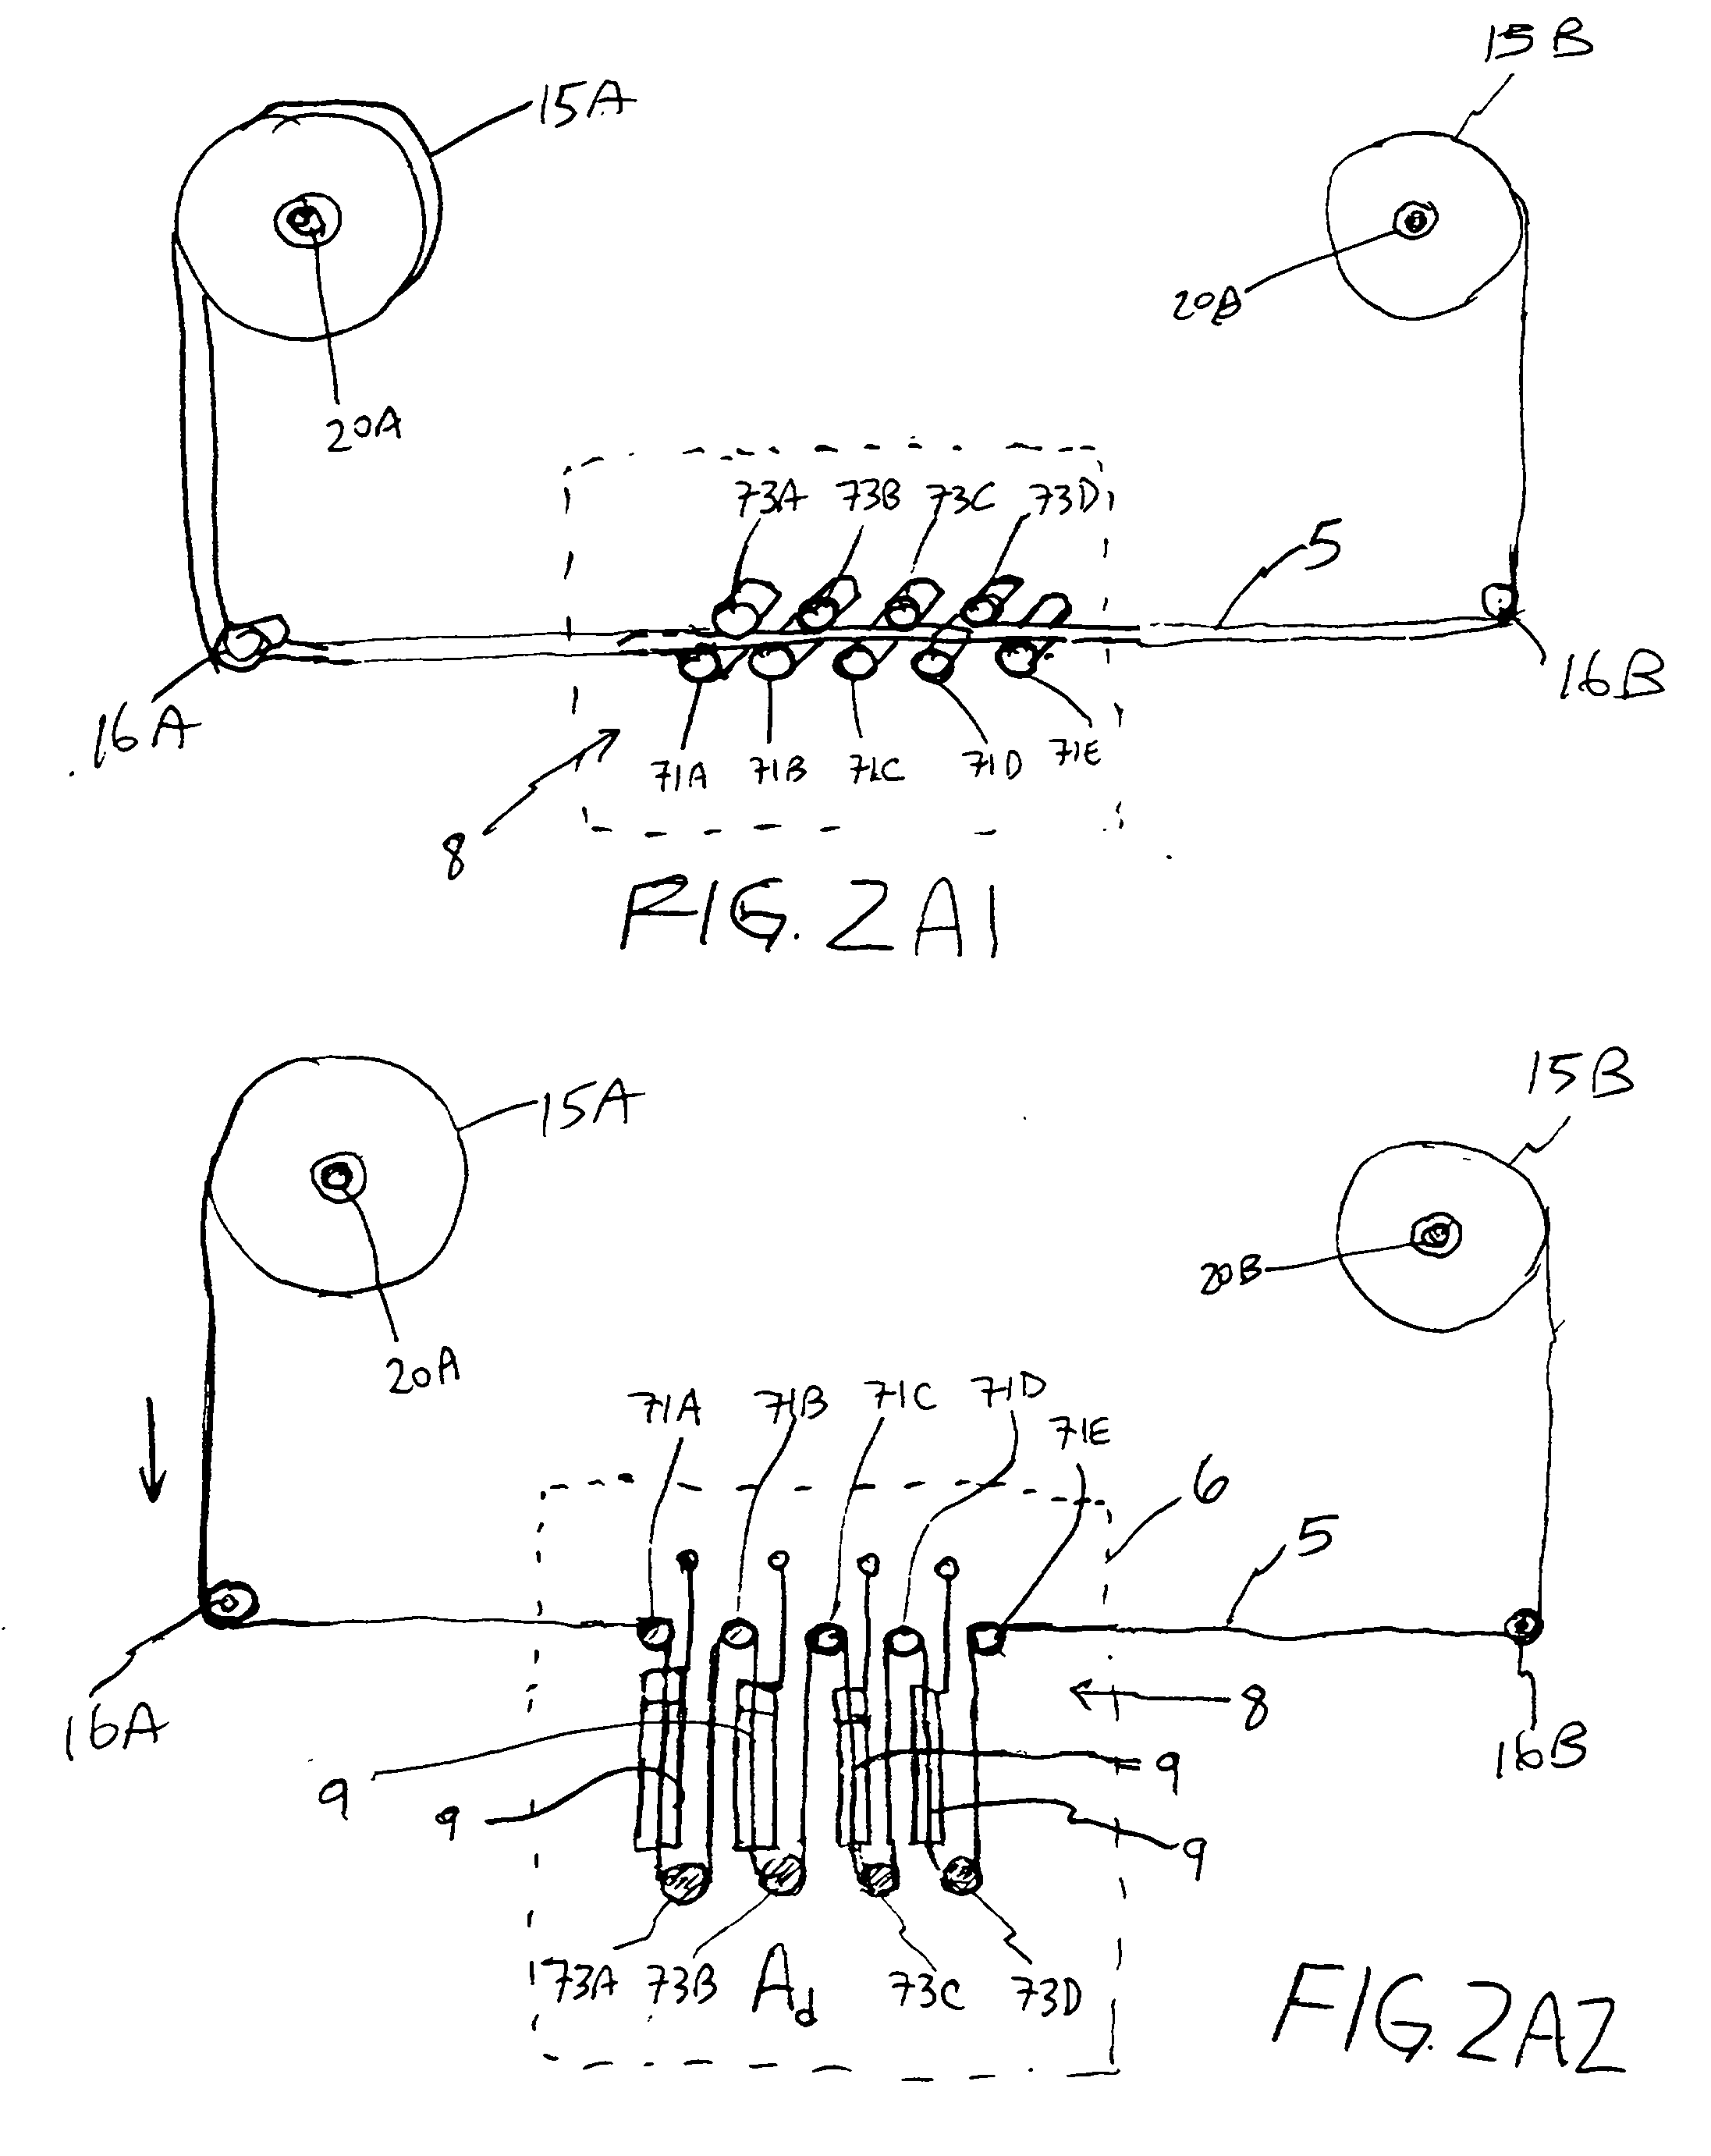 Metal-air fuel cell battery systems having a metal-fuel card storage cassette, insertable within a port in a system housing, containing a supply of substantially planar discrete metal-fuel cards, and fuel card transport mechanisms therein